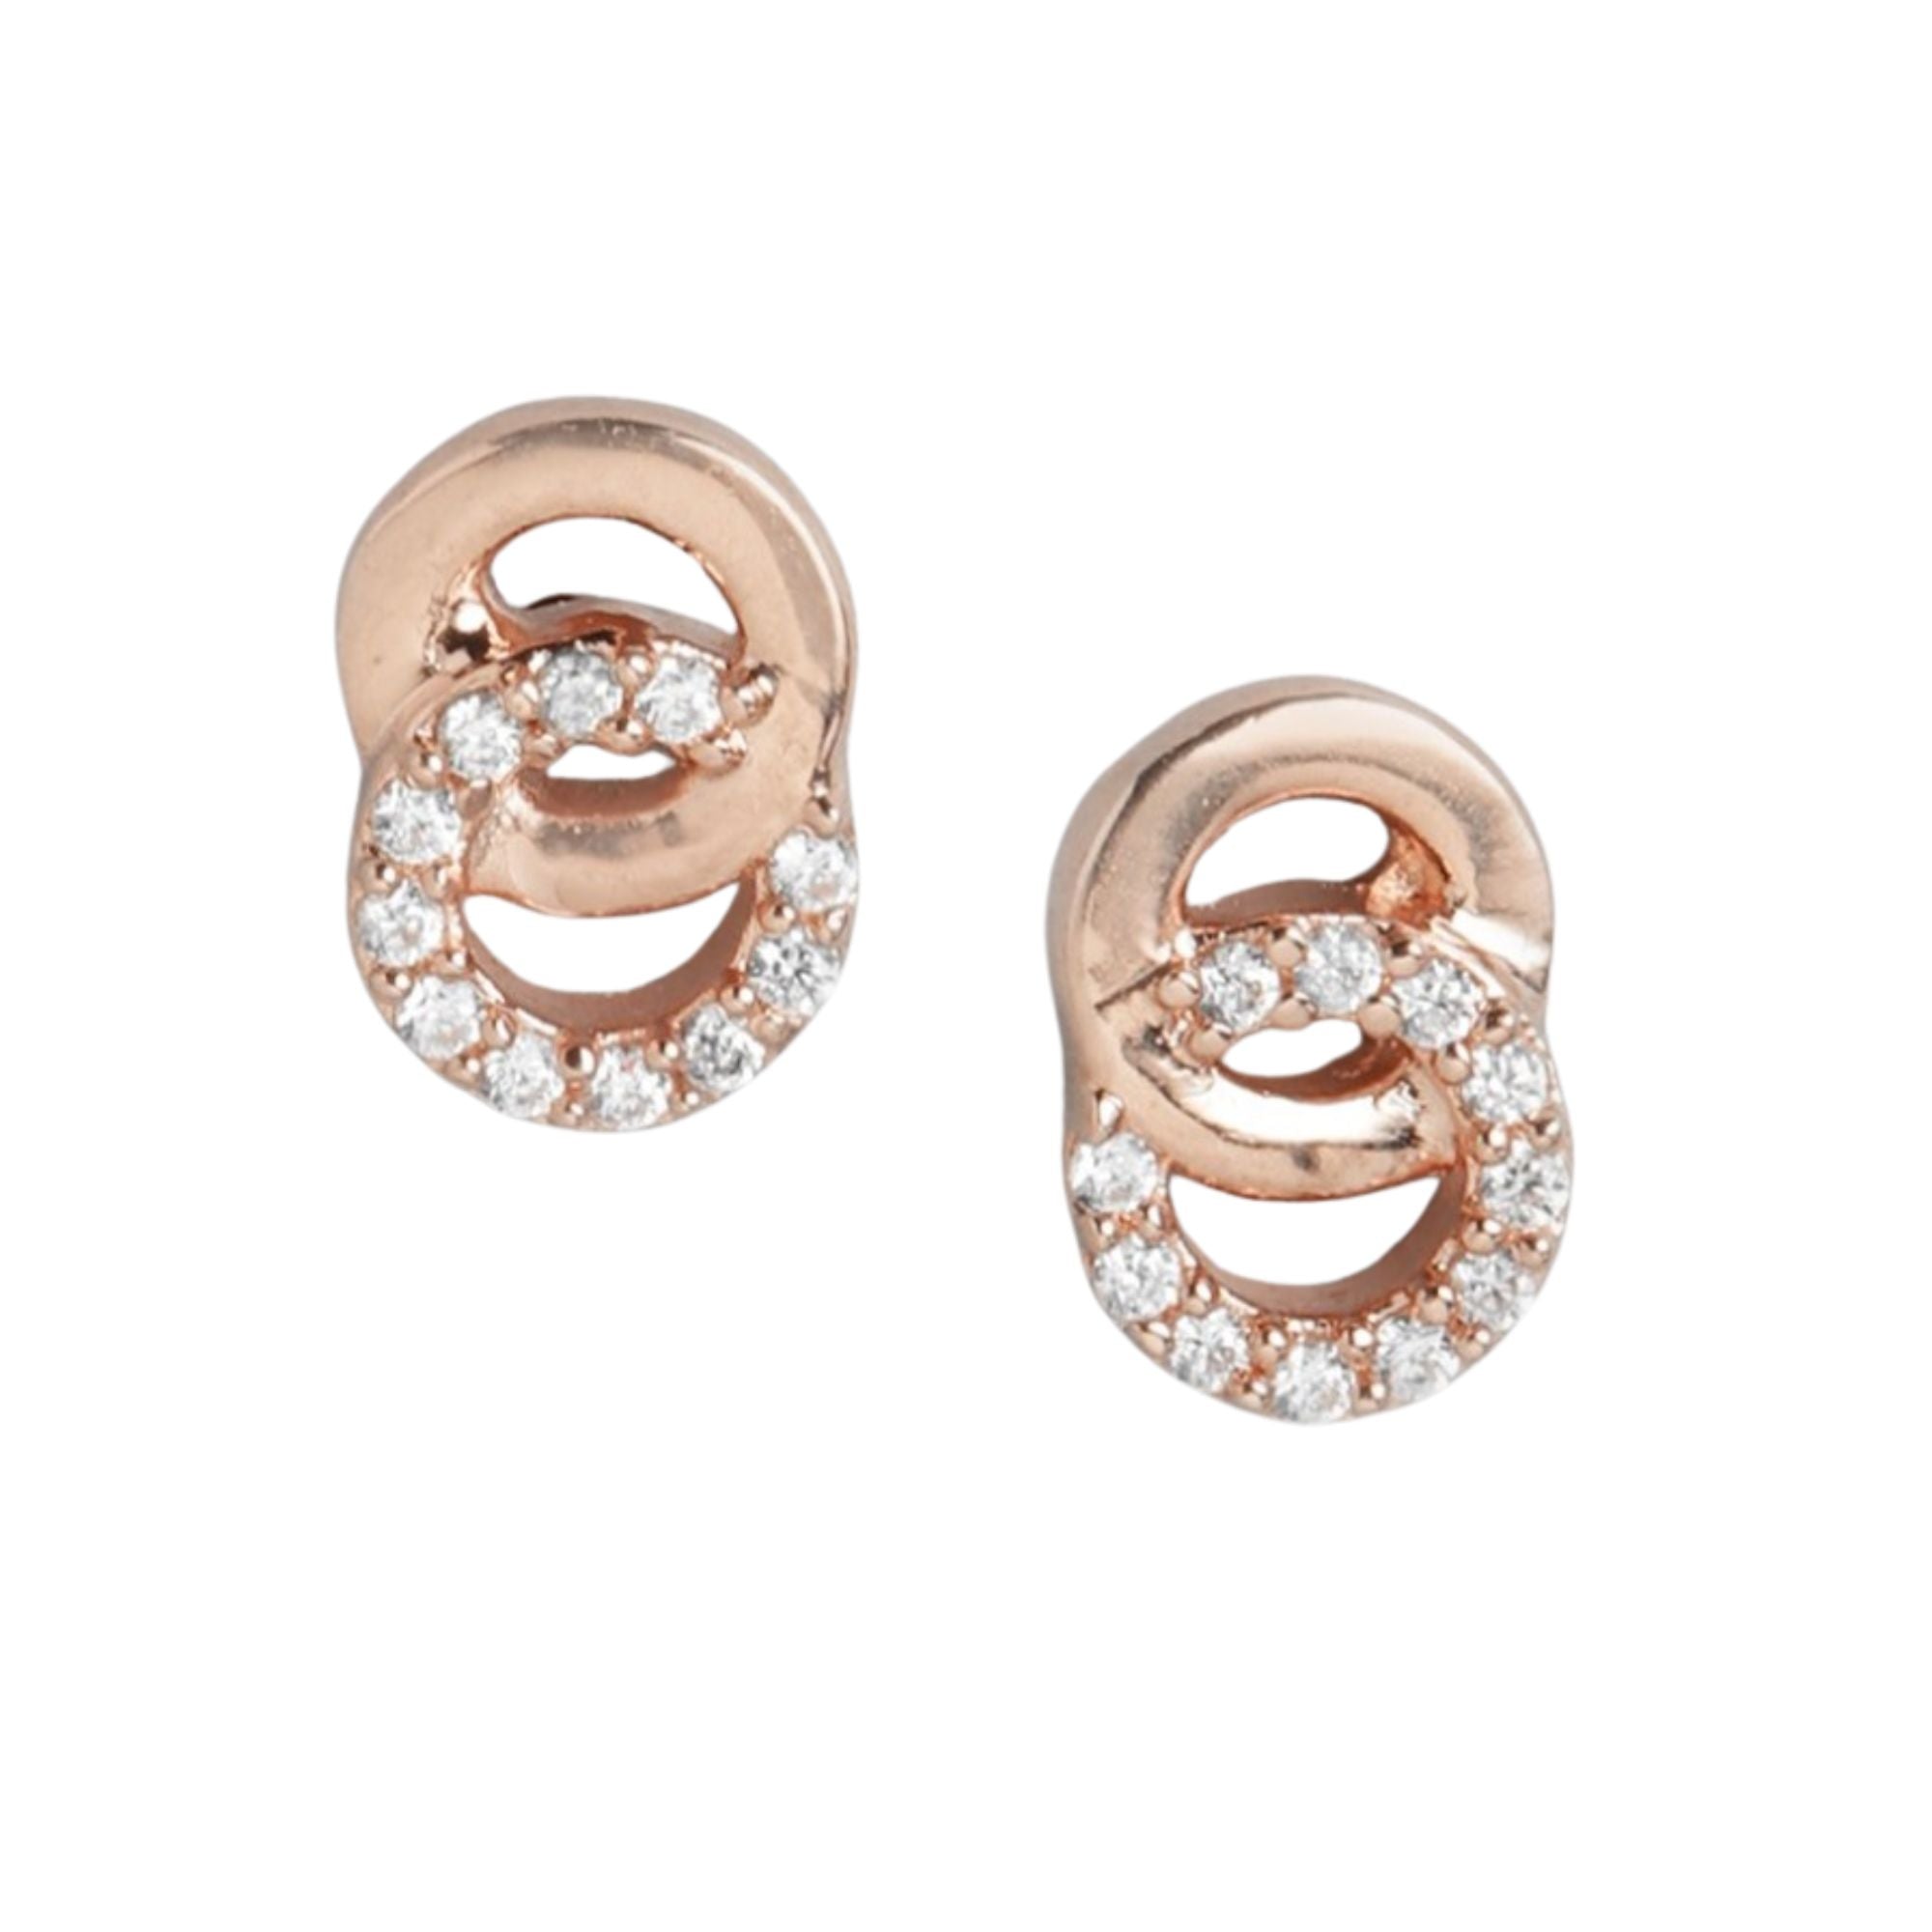 Infinite Radiance 925 Sterling Silver Rose Gold-Plated Infinity Earrings